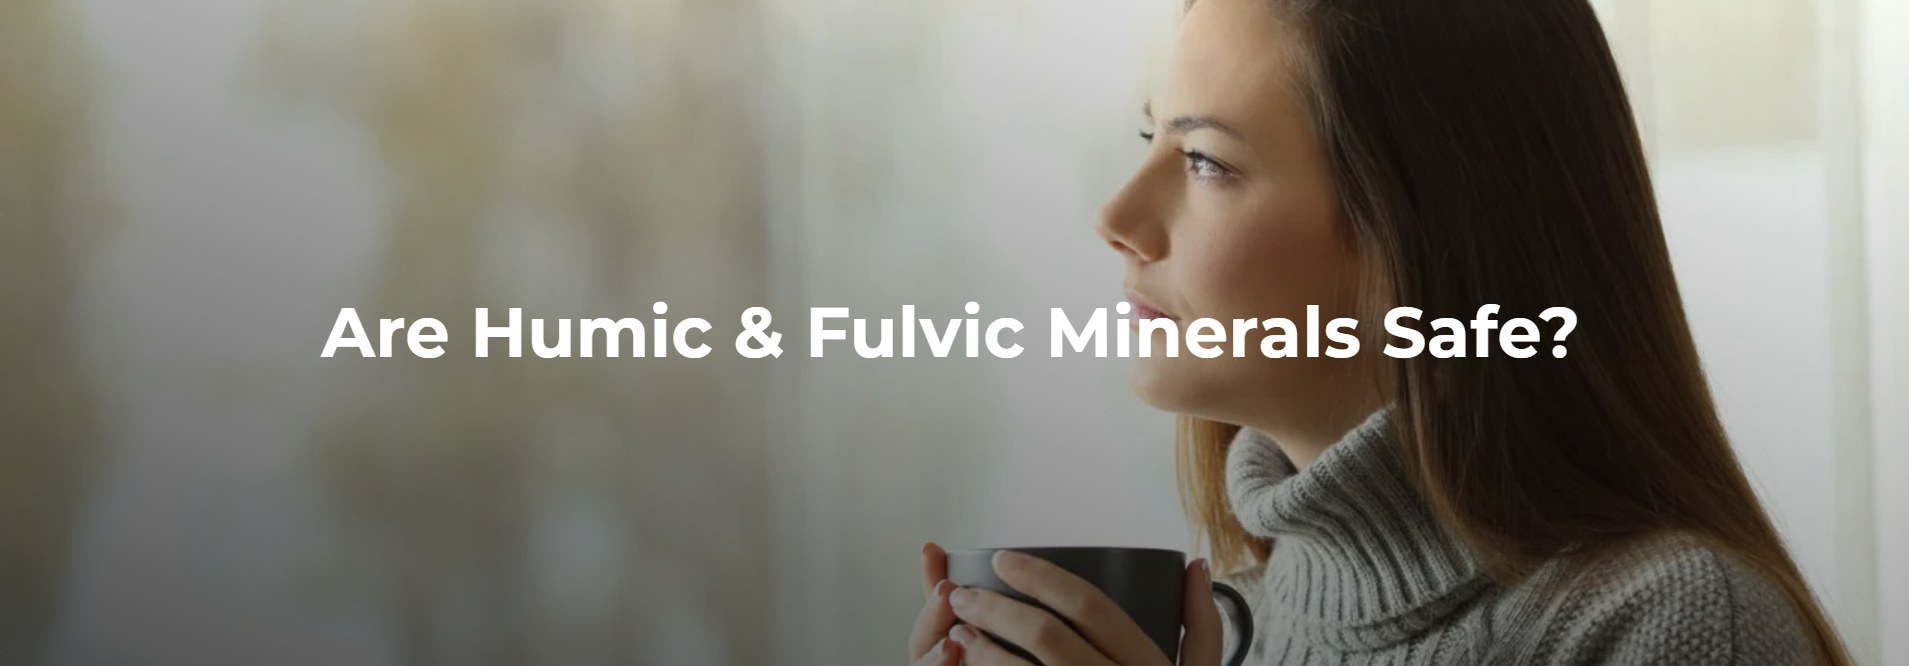 Are Humic & Fulvic Minerals Safe?